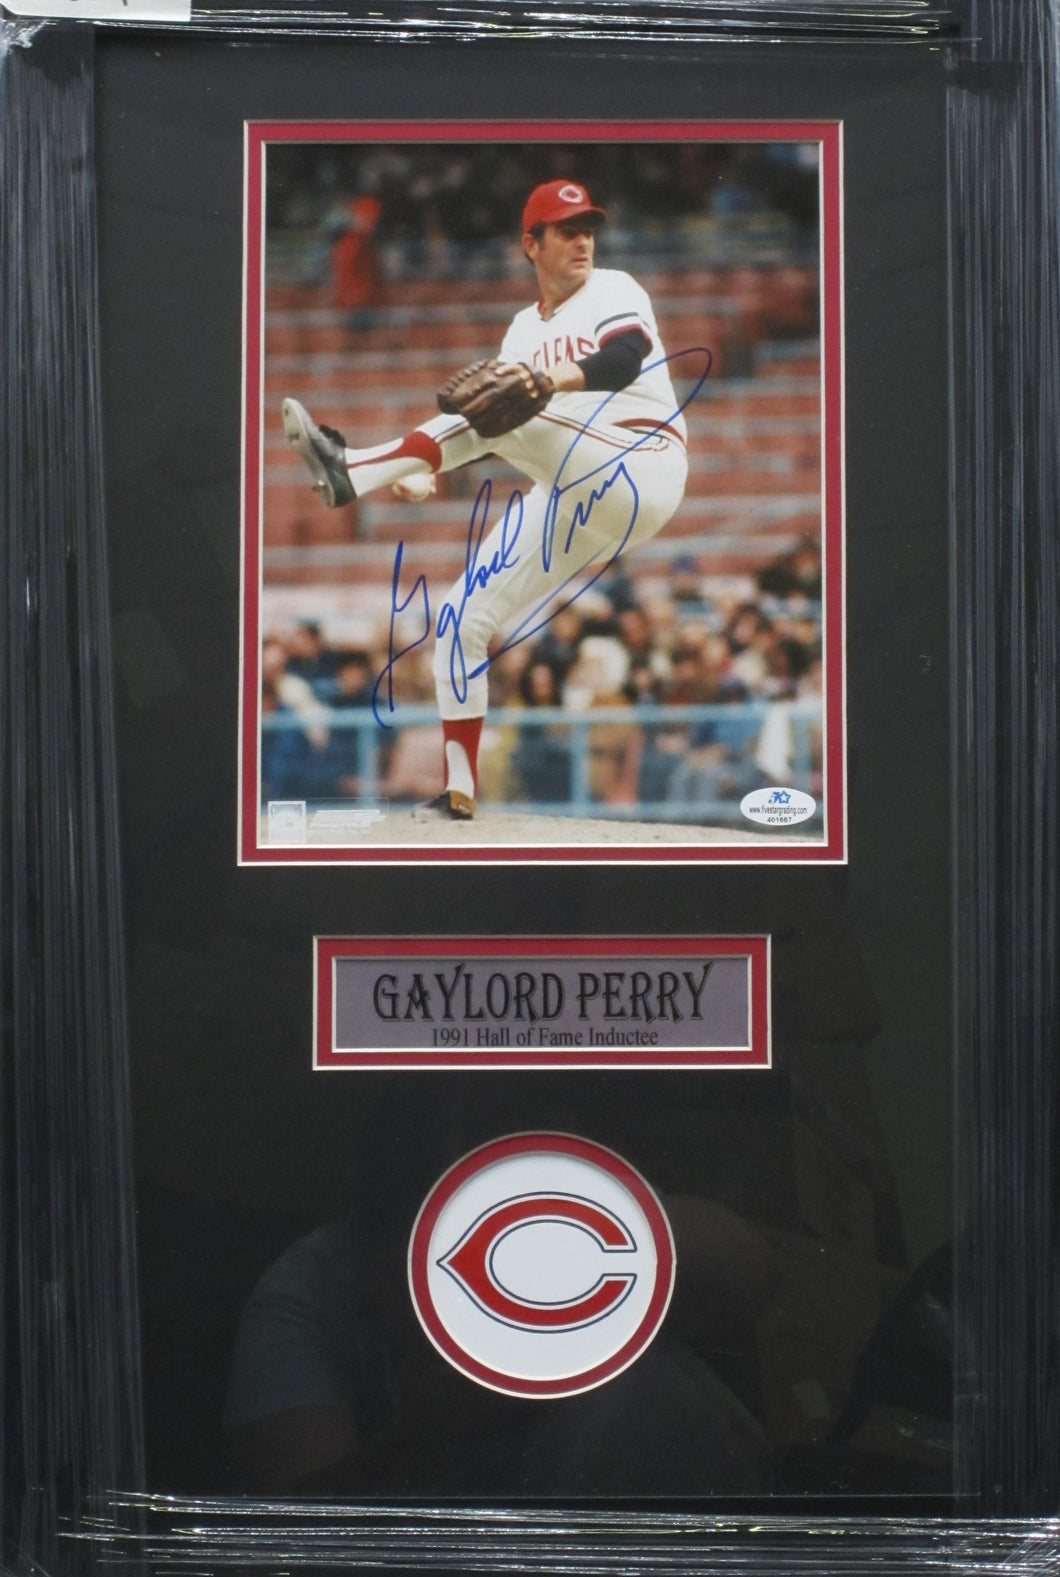 Cleveland Indians Gaylord Perry Signed 8x10 Photo Framed & Matted with COA